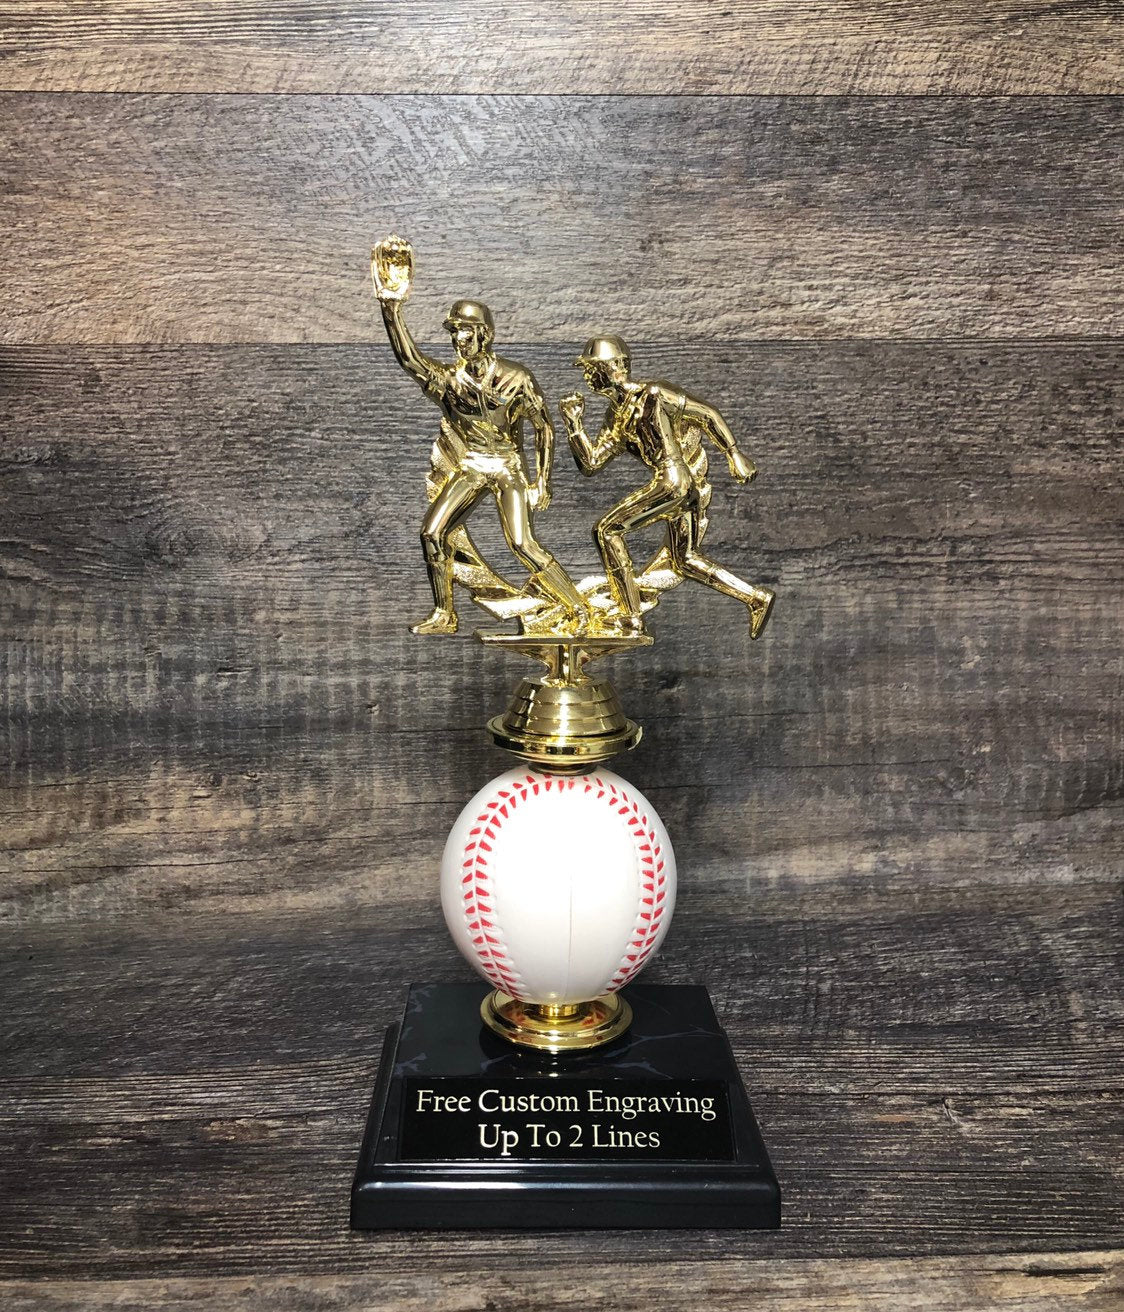 Baseball Trophy League Trophy T Ball Trophy with Spinning Baseball Sports Award Includes Free Engraving